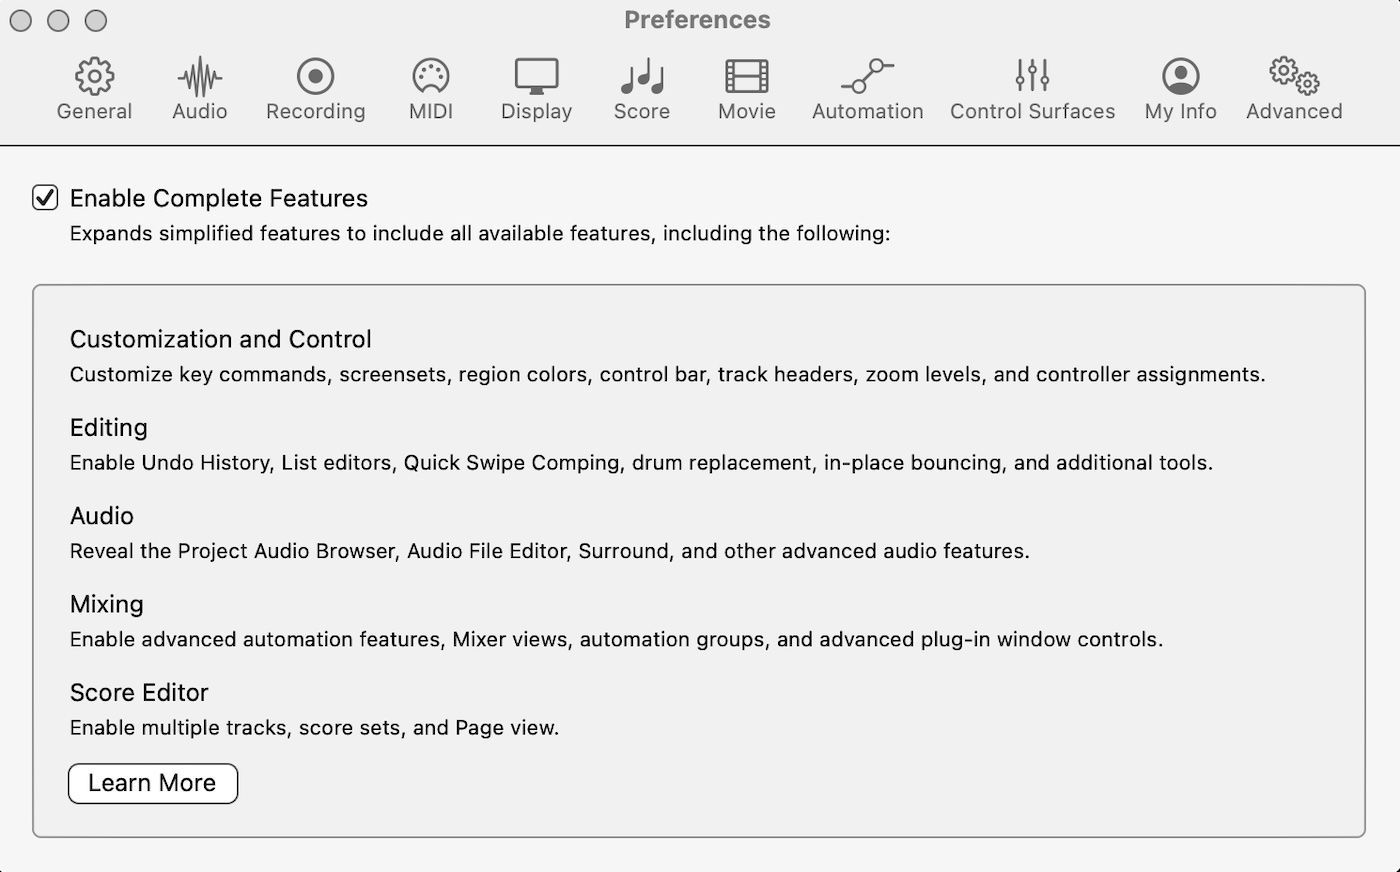 A screenshot of Logic Pro showing the audio preferences including the Enable Complete Features checkbox